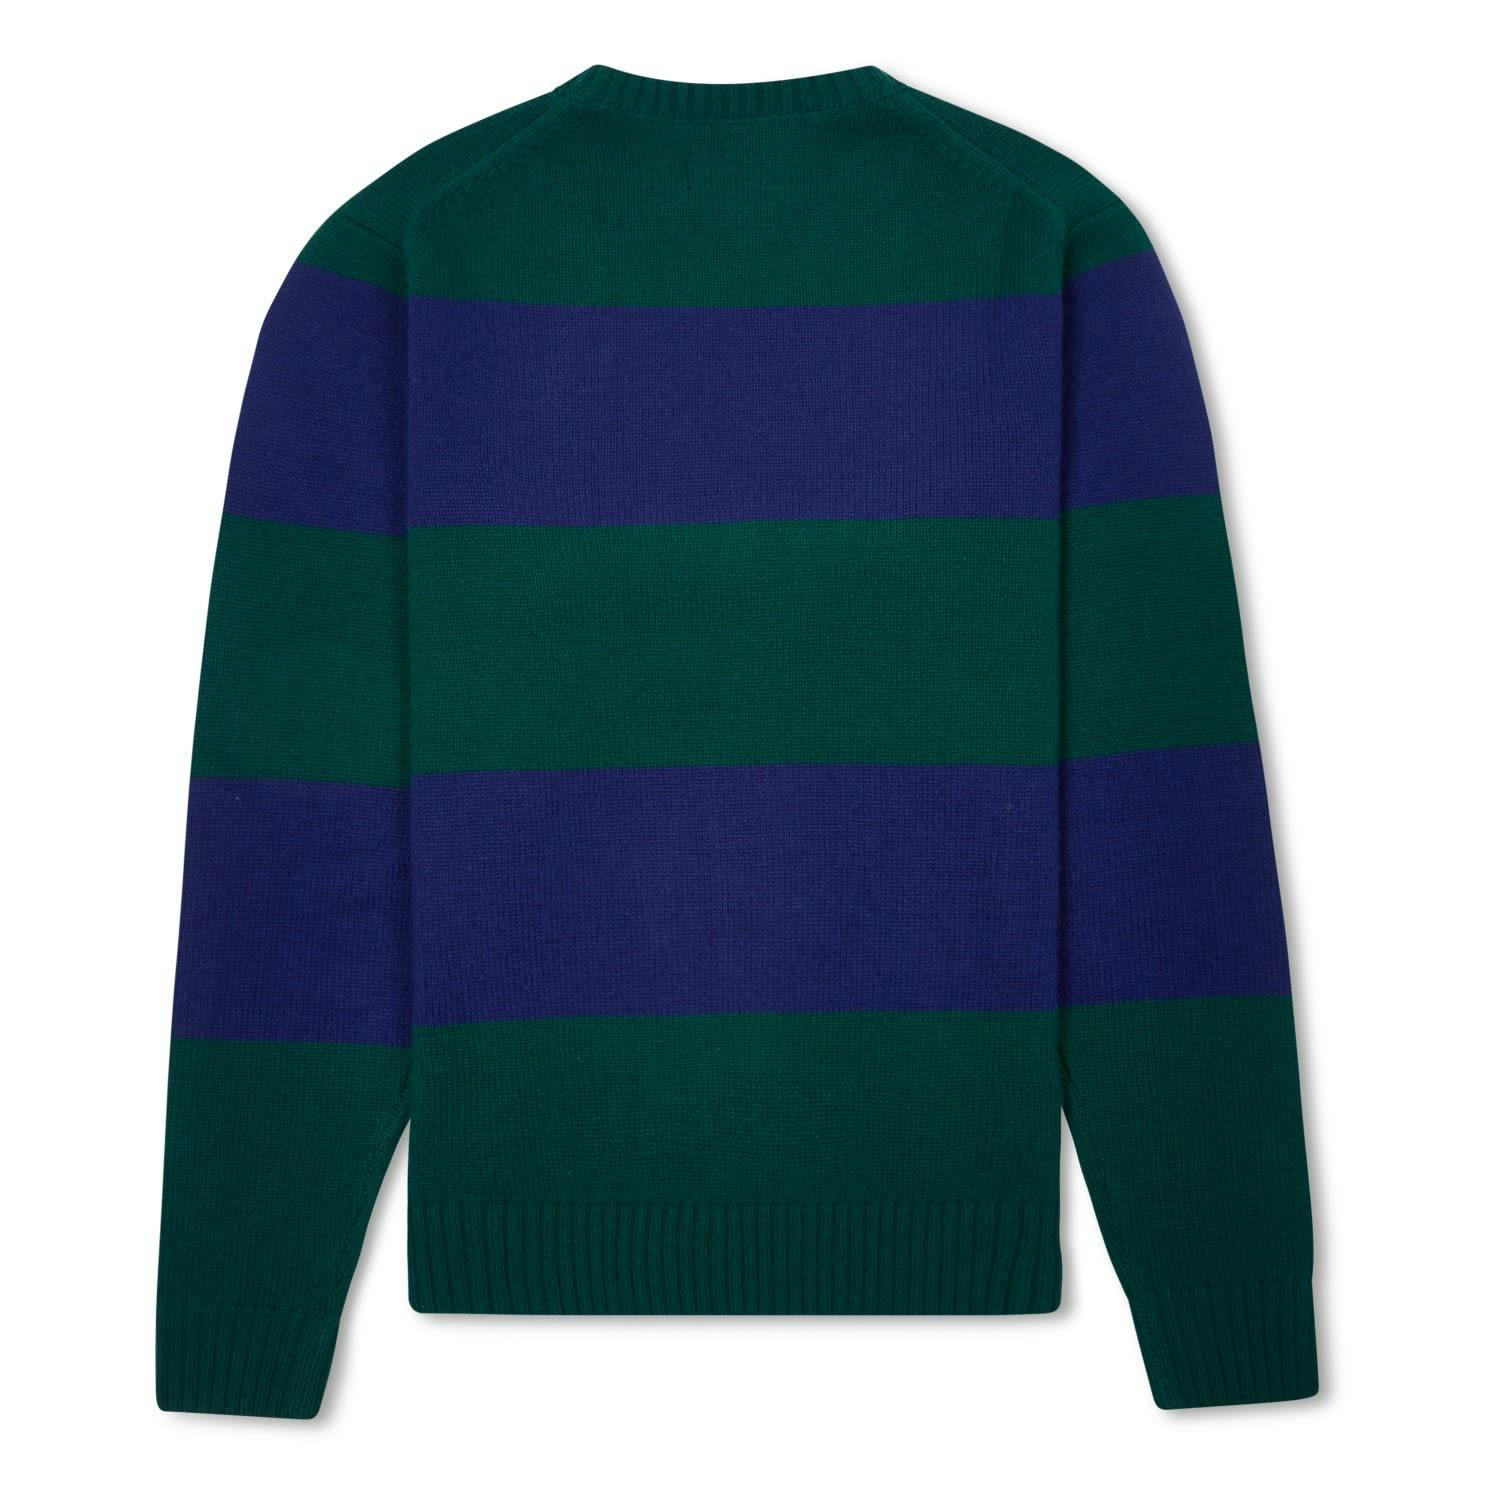 https://res.cloudinary.com/wolfandbadger/image/upload/c_pad,h_1500,w_1500/products/striped-crew-neck-jumper-green__251193082ac725d577699f682d54ddd4